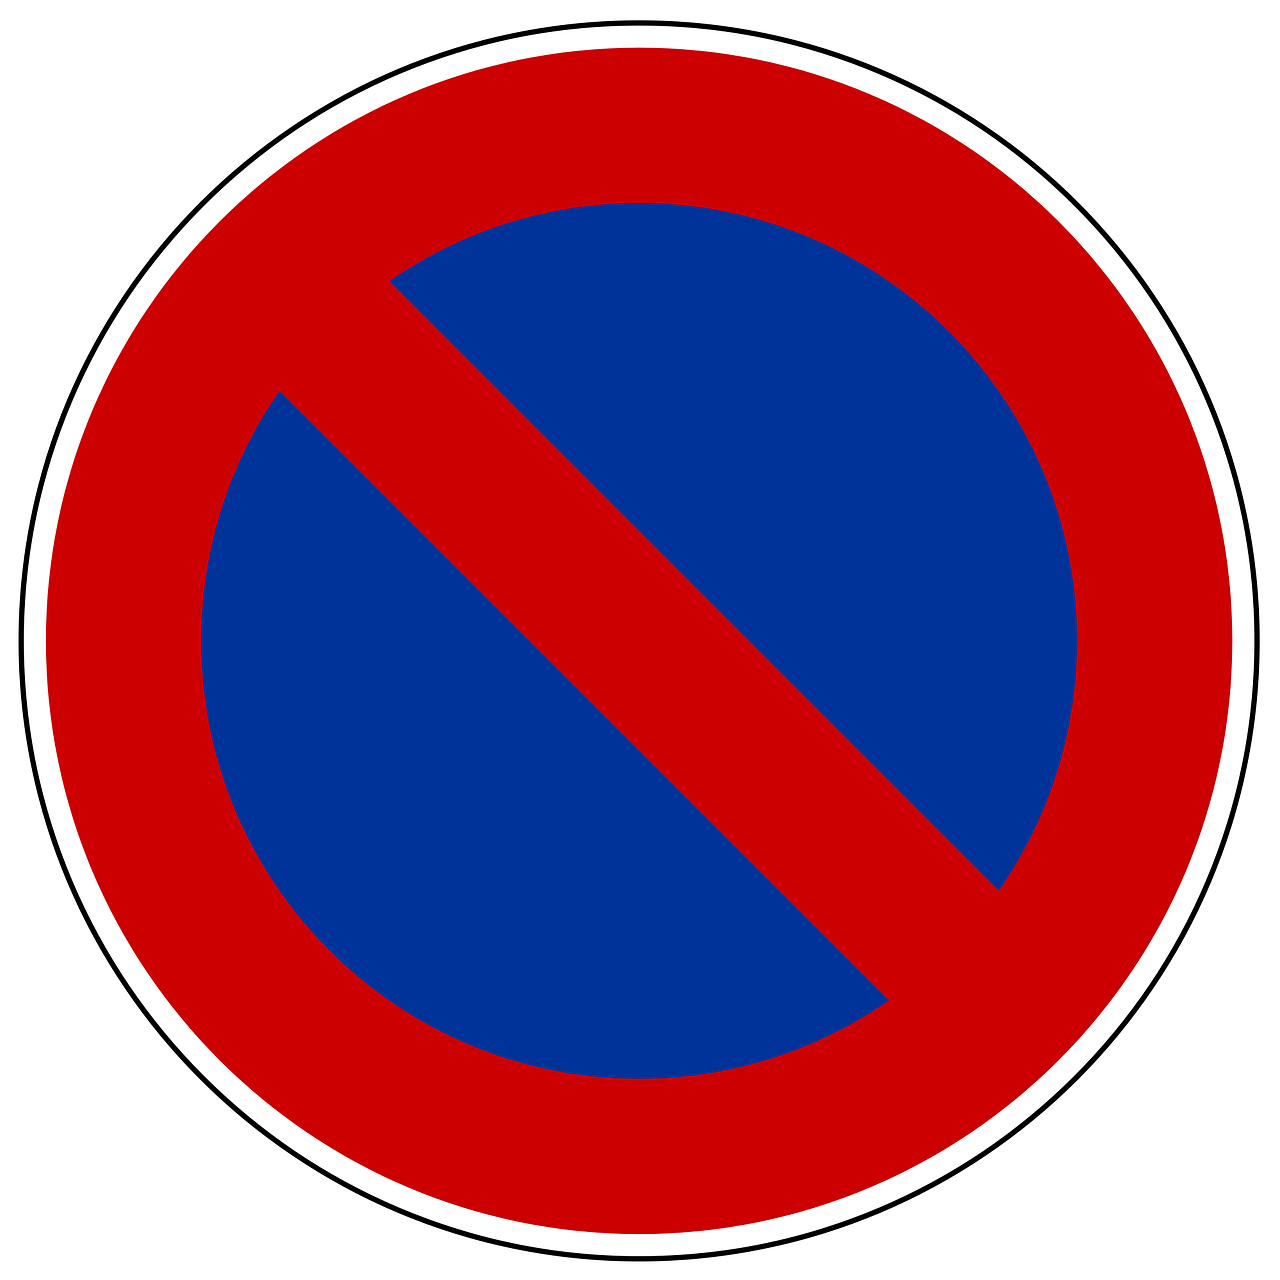 traffic sign road sign shield free photo